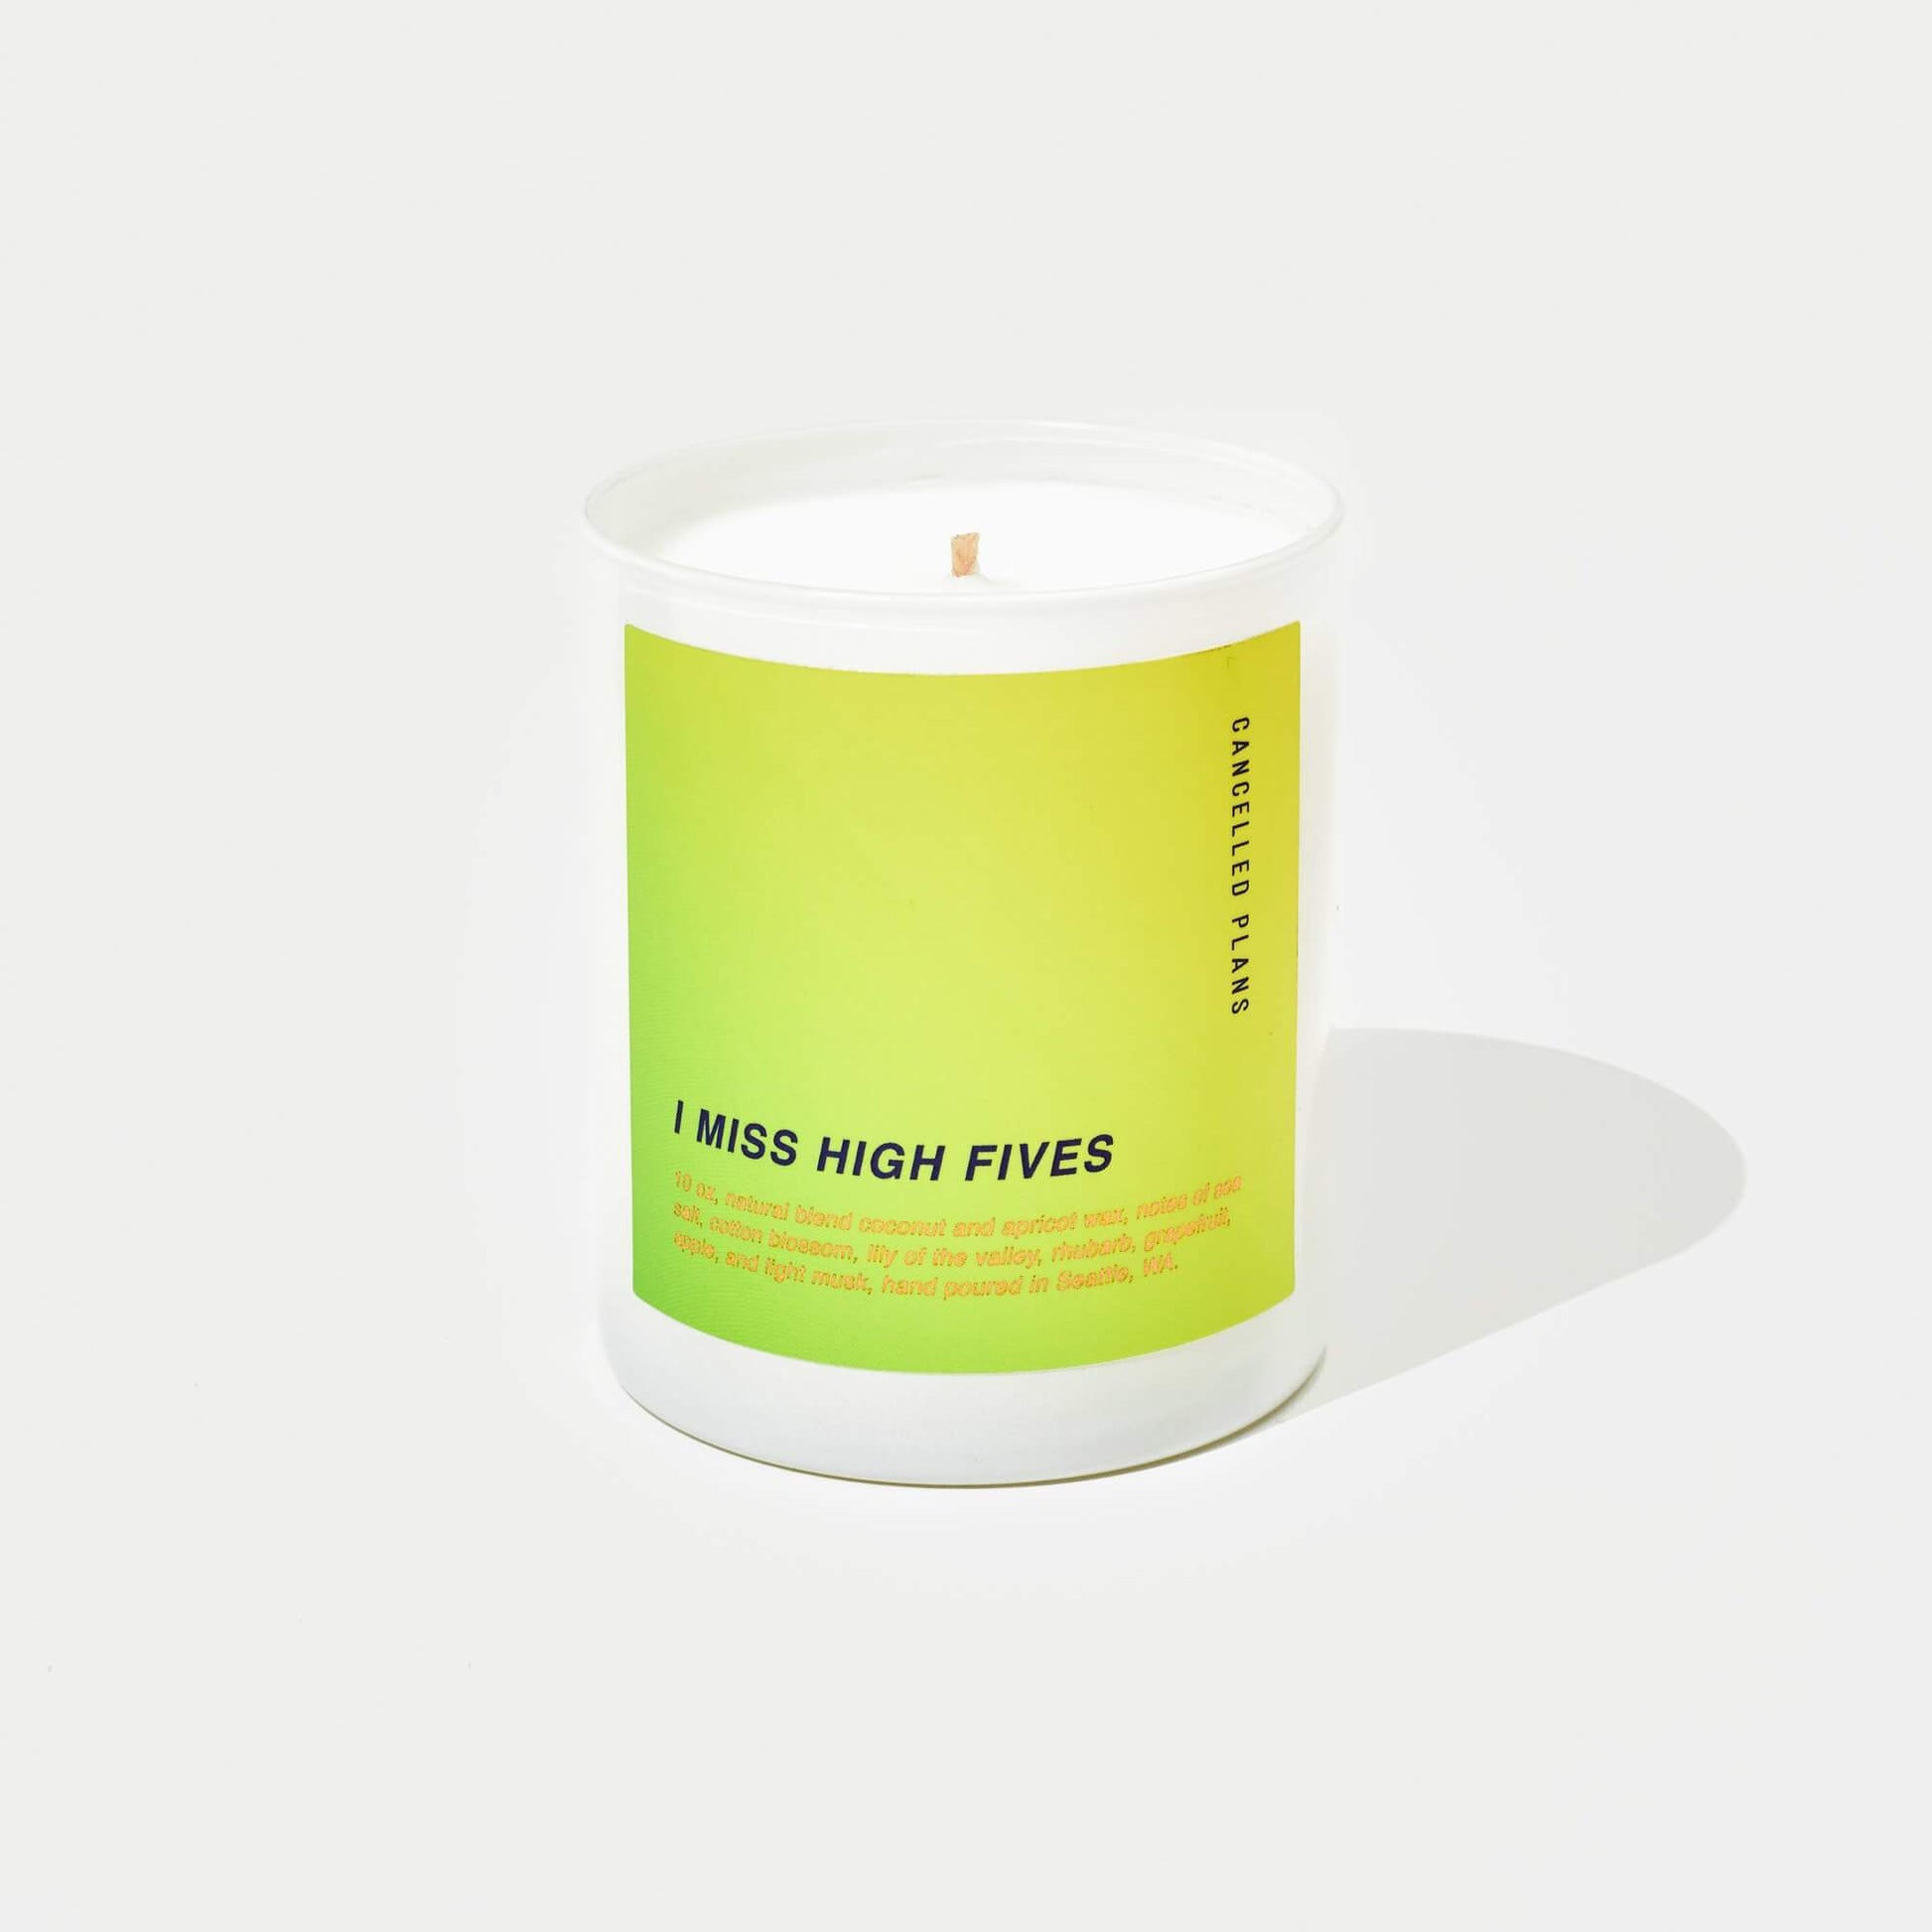 Cancelled Plans I Miss High Fives Scented Candle - Osmology Scented Candles & Home Fragrance